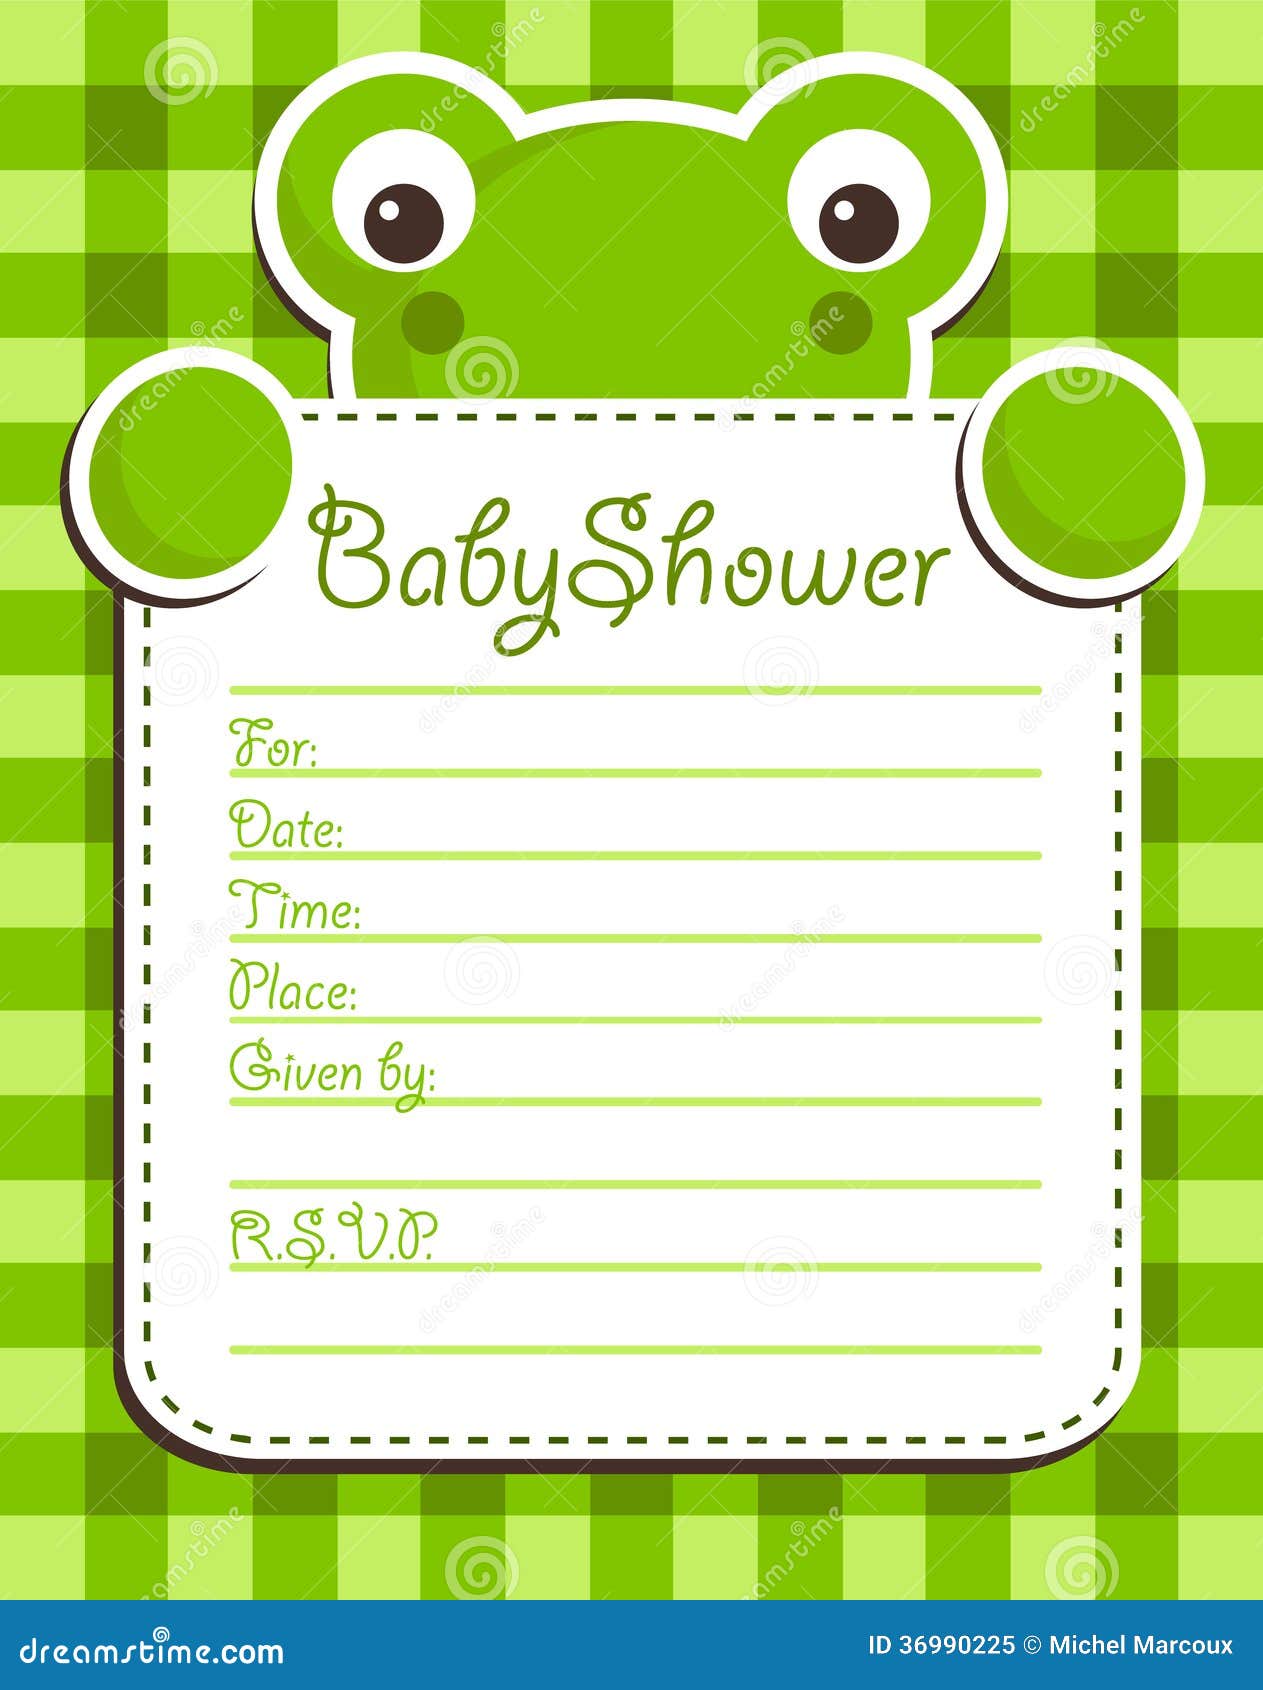 More similar stock images of ` Baby Shower Frog Invitation Card `